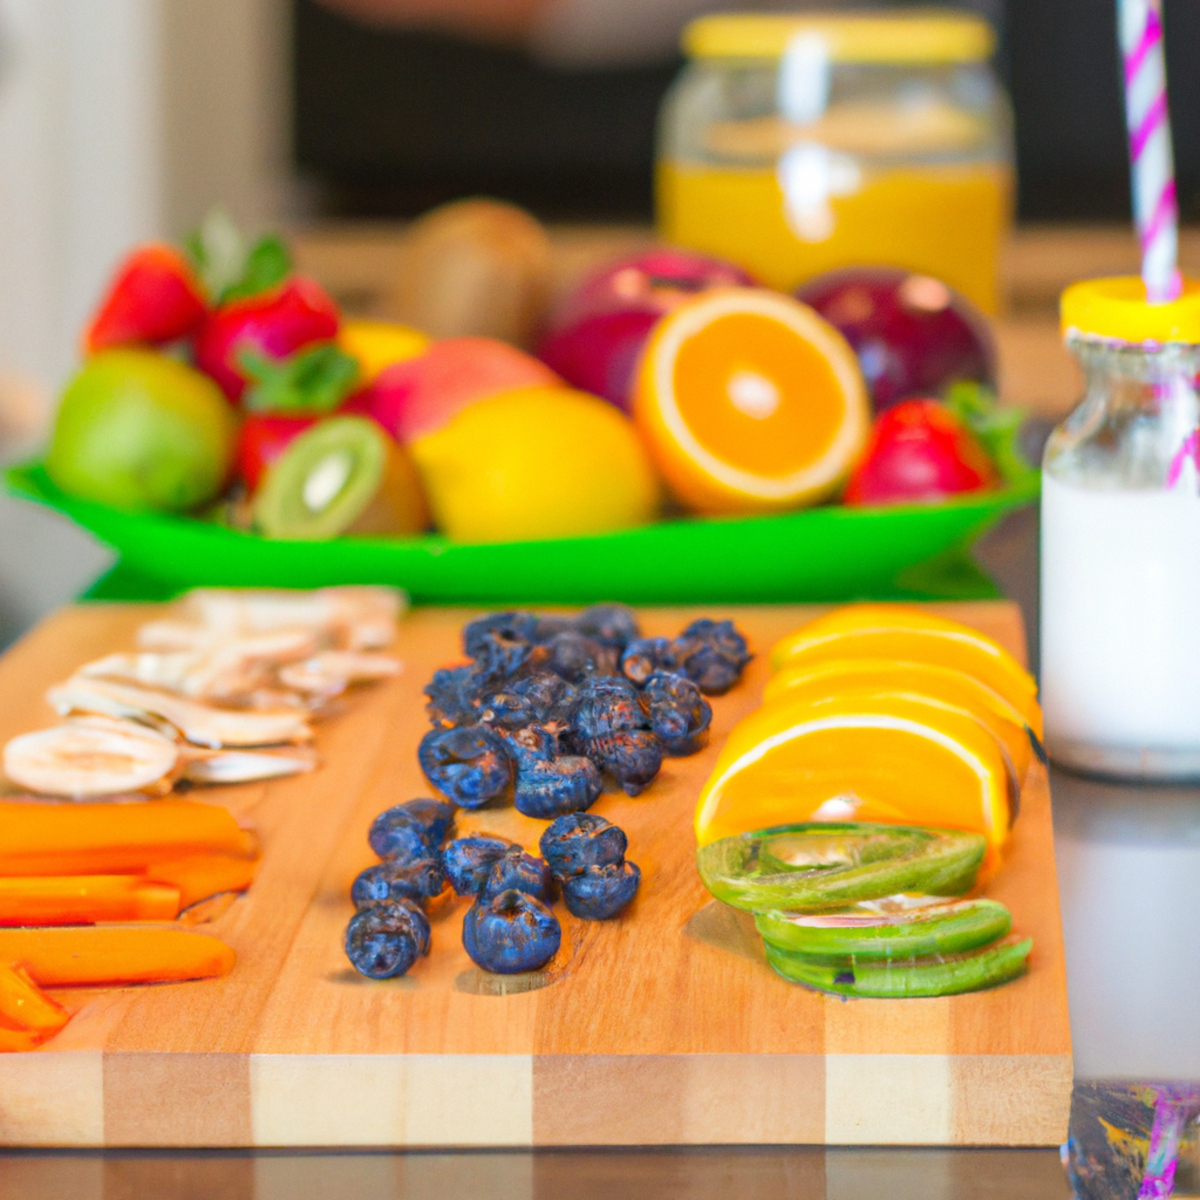 The photo depicts a close-up of a wooden cutting board with various colorful fruits and vegetables arranged in a neat row. Among the produce are sliced kiwis, strawberries, blueberries, and carrots. In the background, a glass jar filled with homemade yogurt sits on a kitchen counter. The vibrant colors of the fruits and vegetables suggest a healthy and balanced diet, while the jar of yogurt alludes to the importance of probiotics in maintaining gut health. The photo captures the essence of the article's message: that a diet rich in probiotics and whole foods can play a crucial role in preventing and managing diseases.